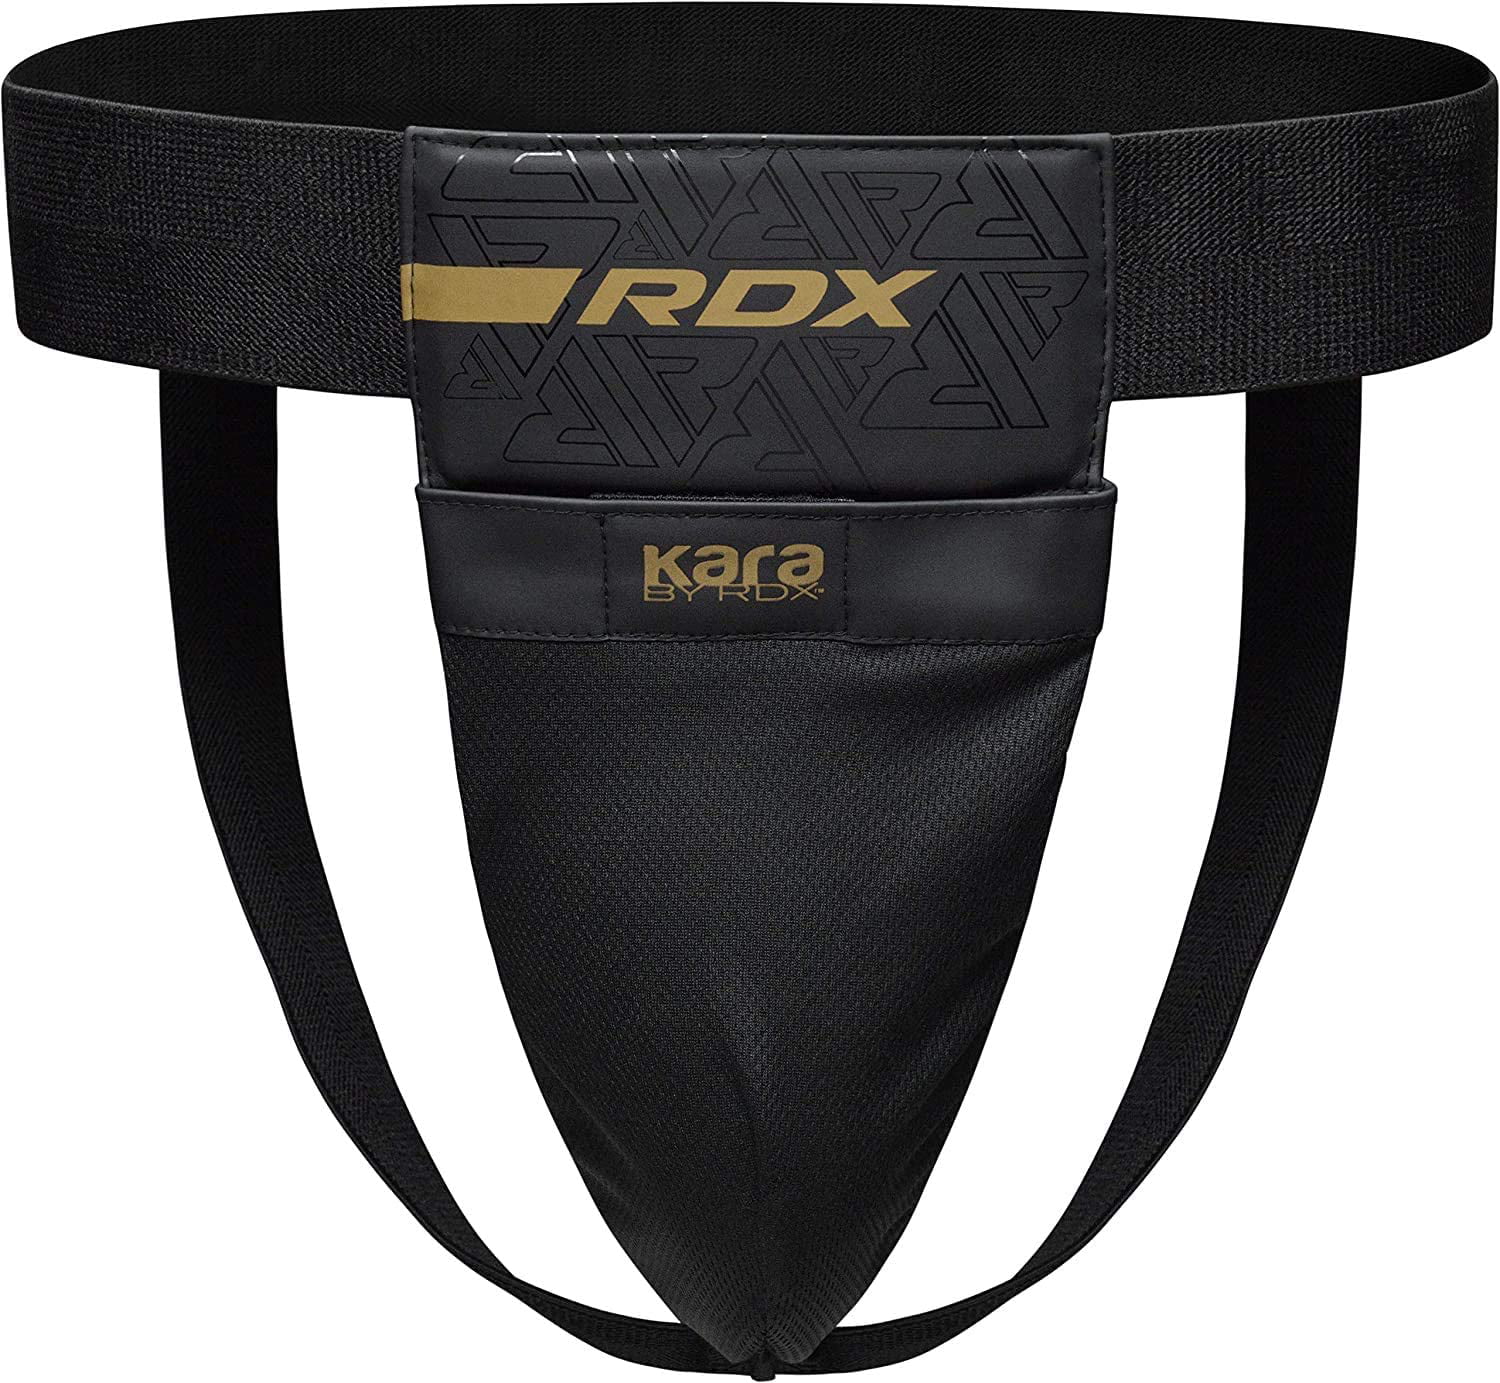 Muay Thai Kickboxing and MMA Fighting Taekwondo and Grappling RDX Groin Guard for Boxing Maya Hide Leather Abdo Gear for Martial Arts Training Men Jockstrap Abdominal Protector for Sparring 